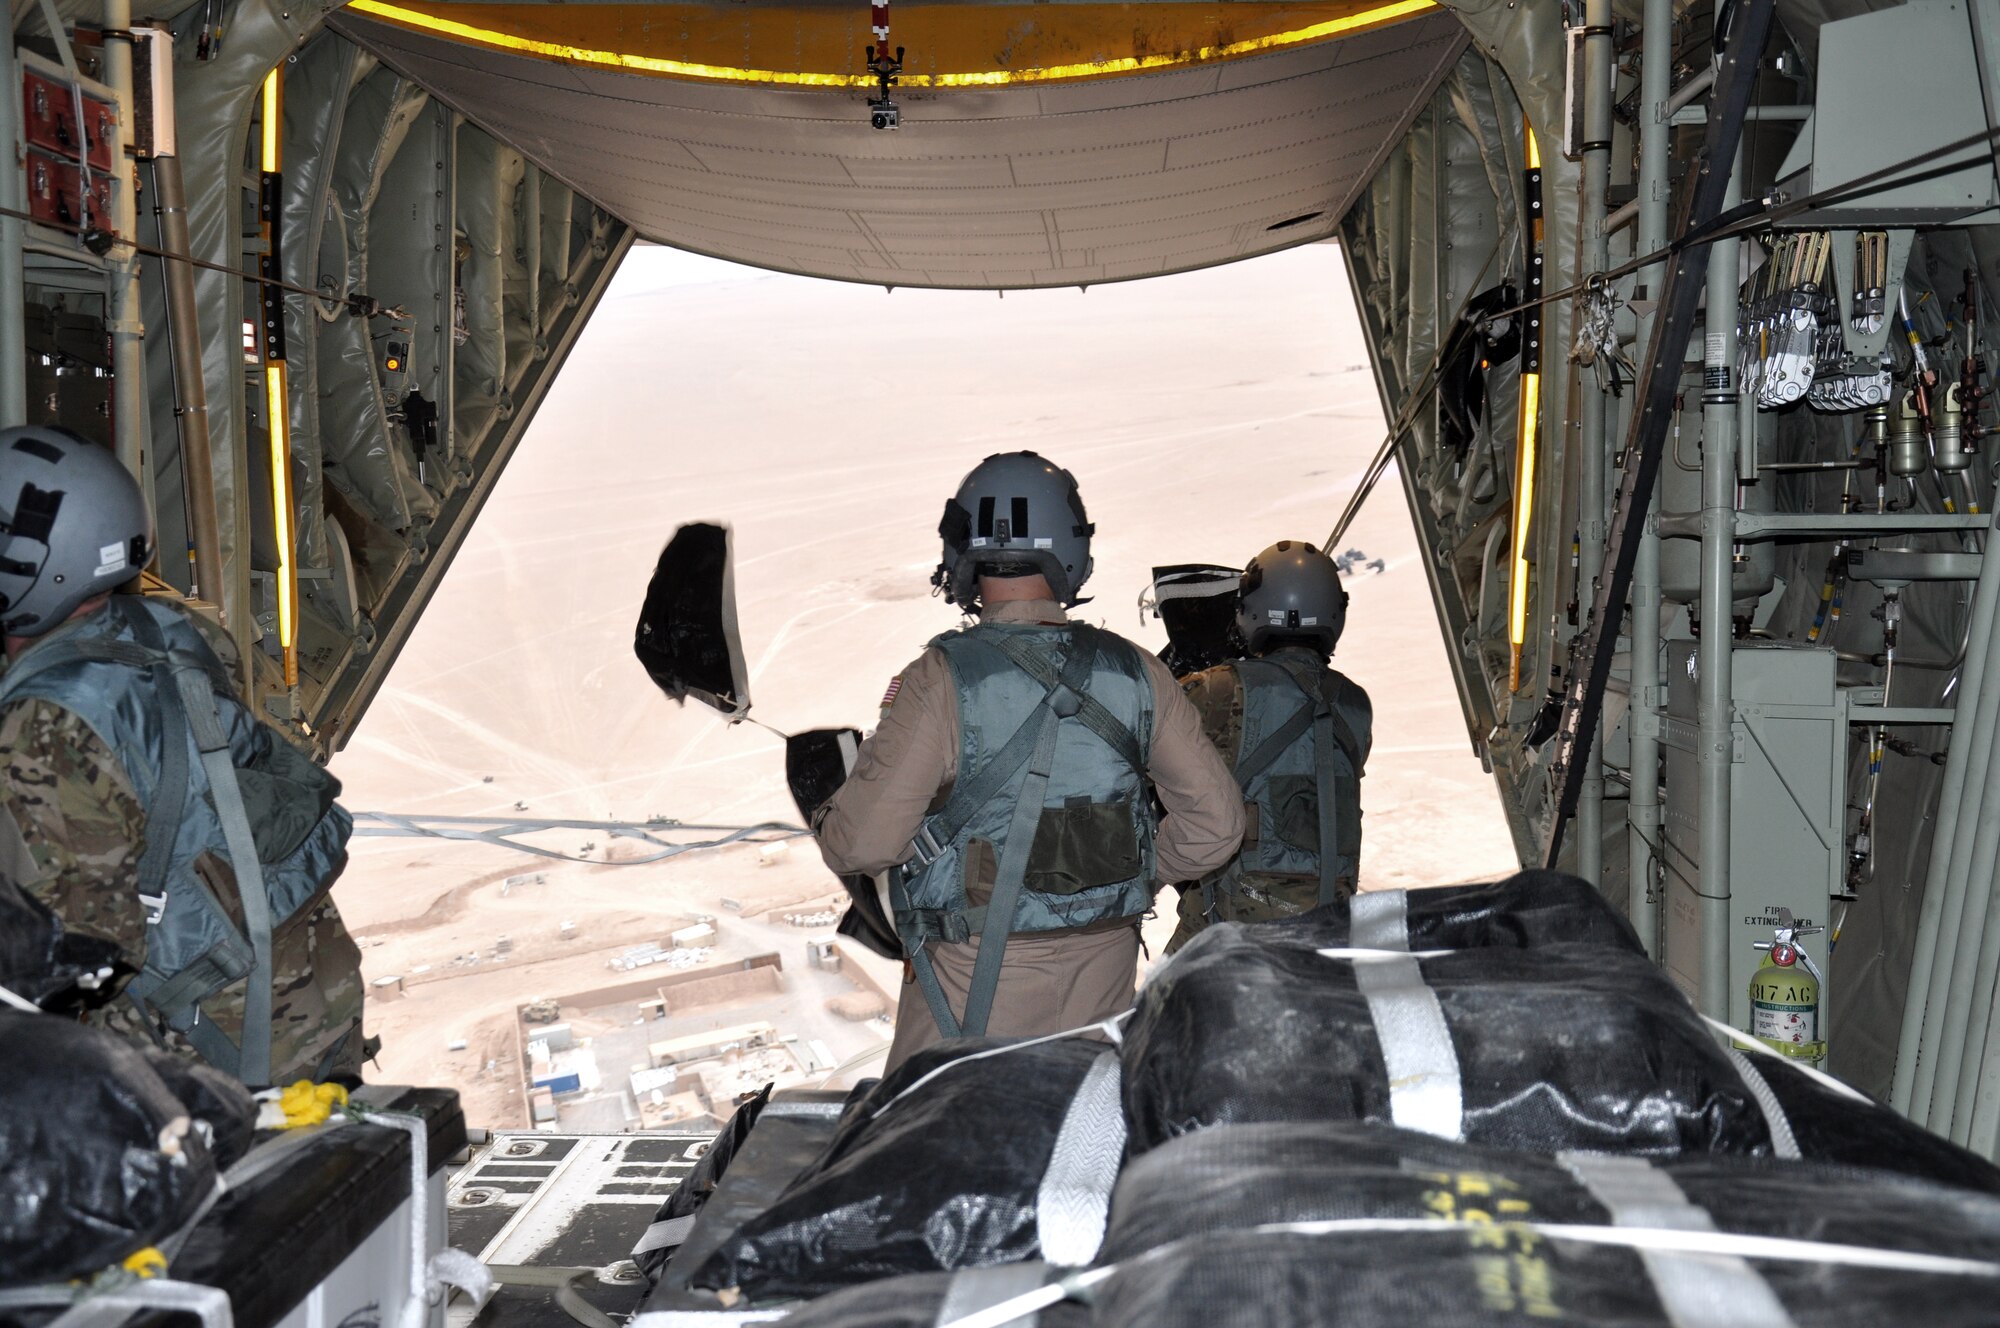 Senior Airman Dan Simonsen, Senior Master Sgt. Steve Martin and Senior Airman Marcus Wright, loadmasters with the 772nd Expeditionary Airlift Squadron, perform a Low Cost Low Altitude airdrop from the back of a C-130J in southwest Afghanistan Nov. 15. They are deployed from Dyess Air Force Base, Texas. (U.S. Air Force photo/Capt. Tristan Hinderliter)